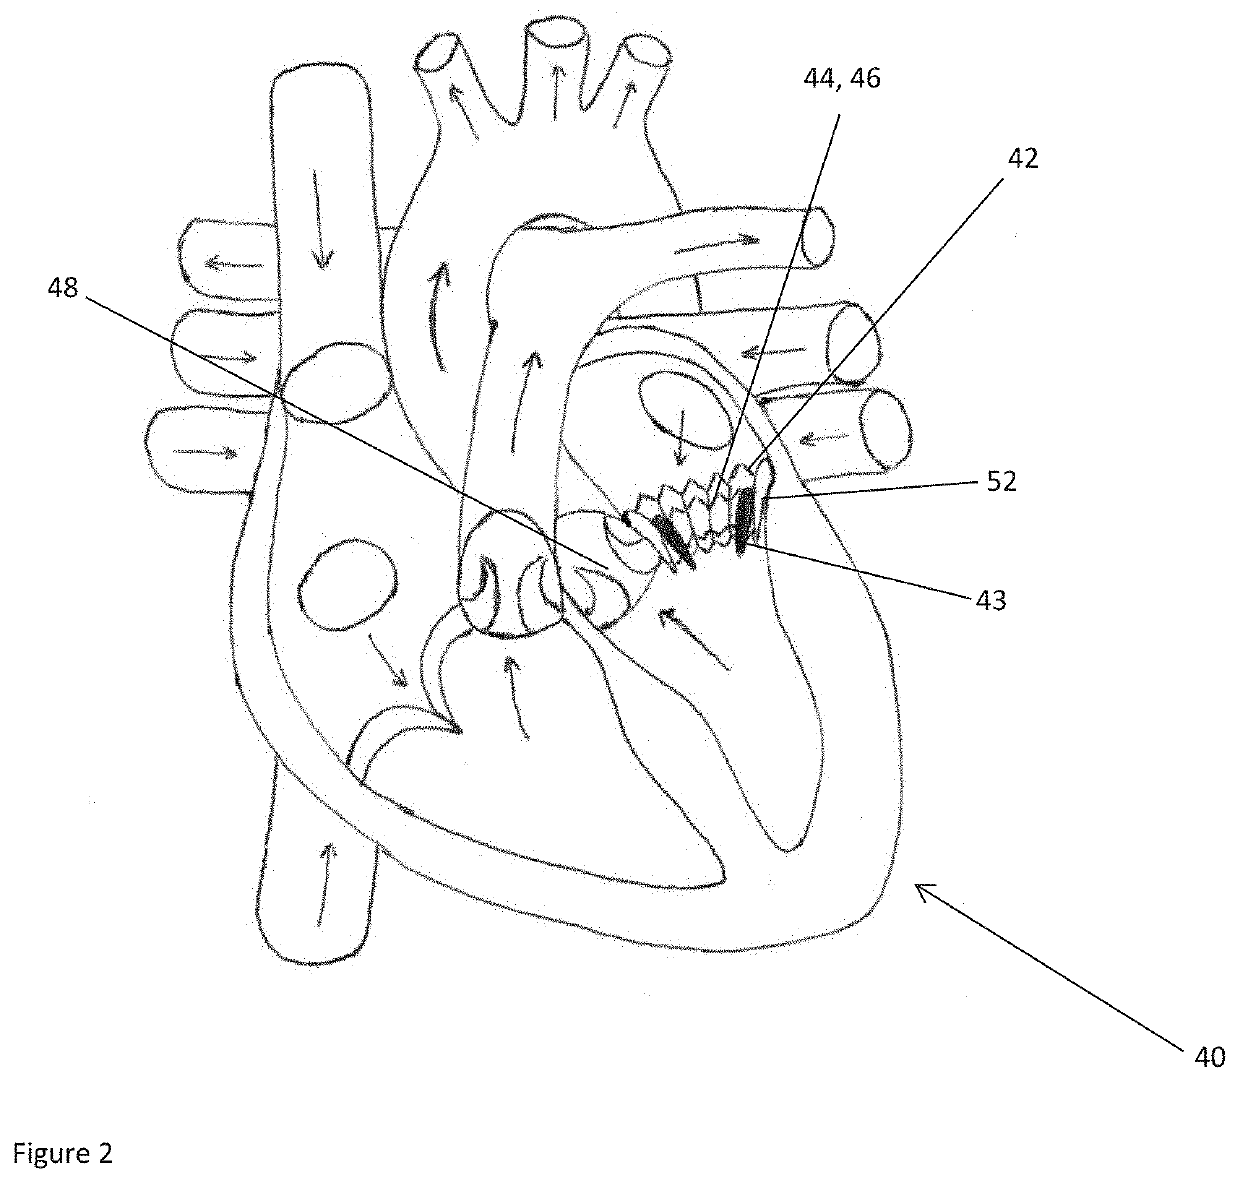 Method and system for determining a risk of hemodynamic compromise after cardiac intervention